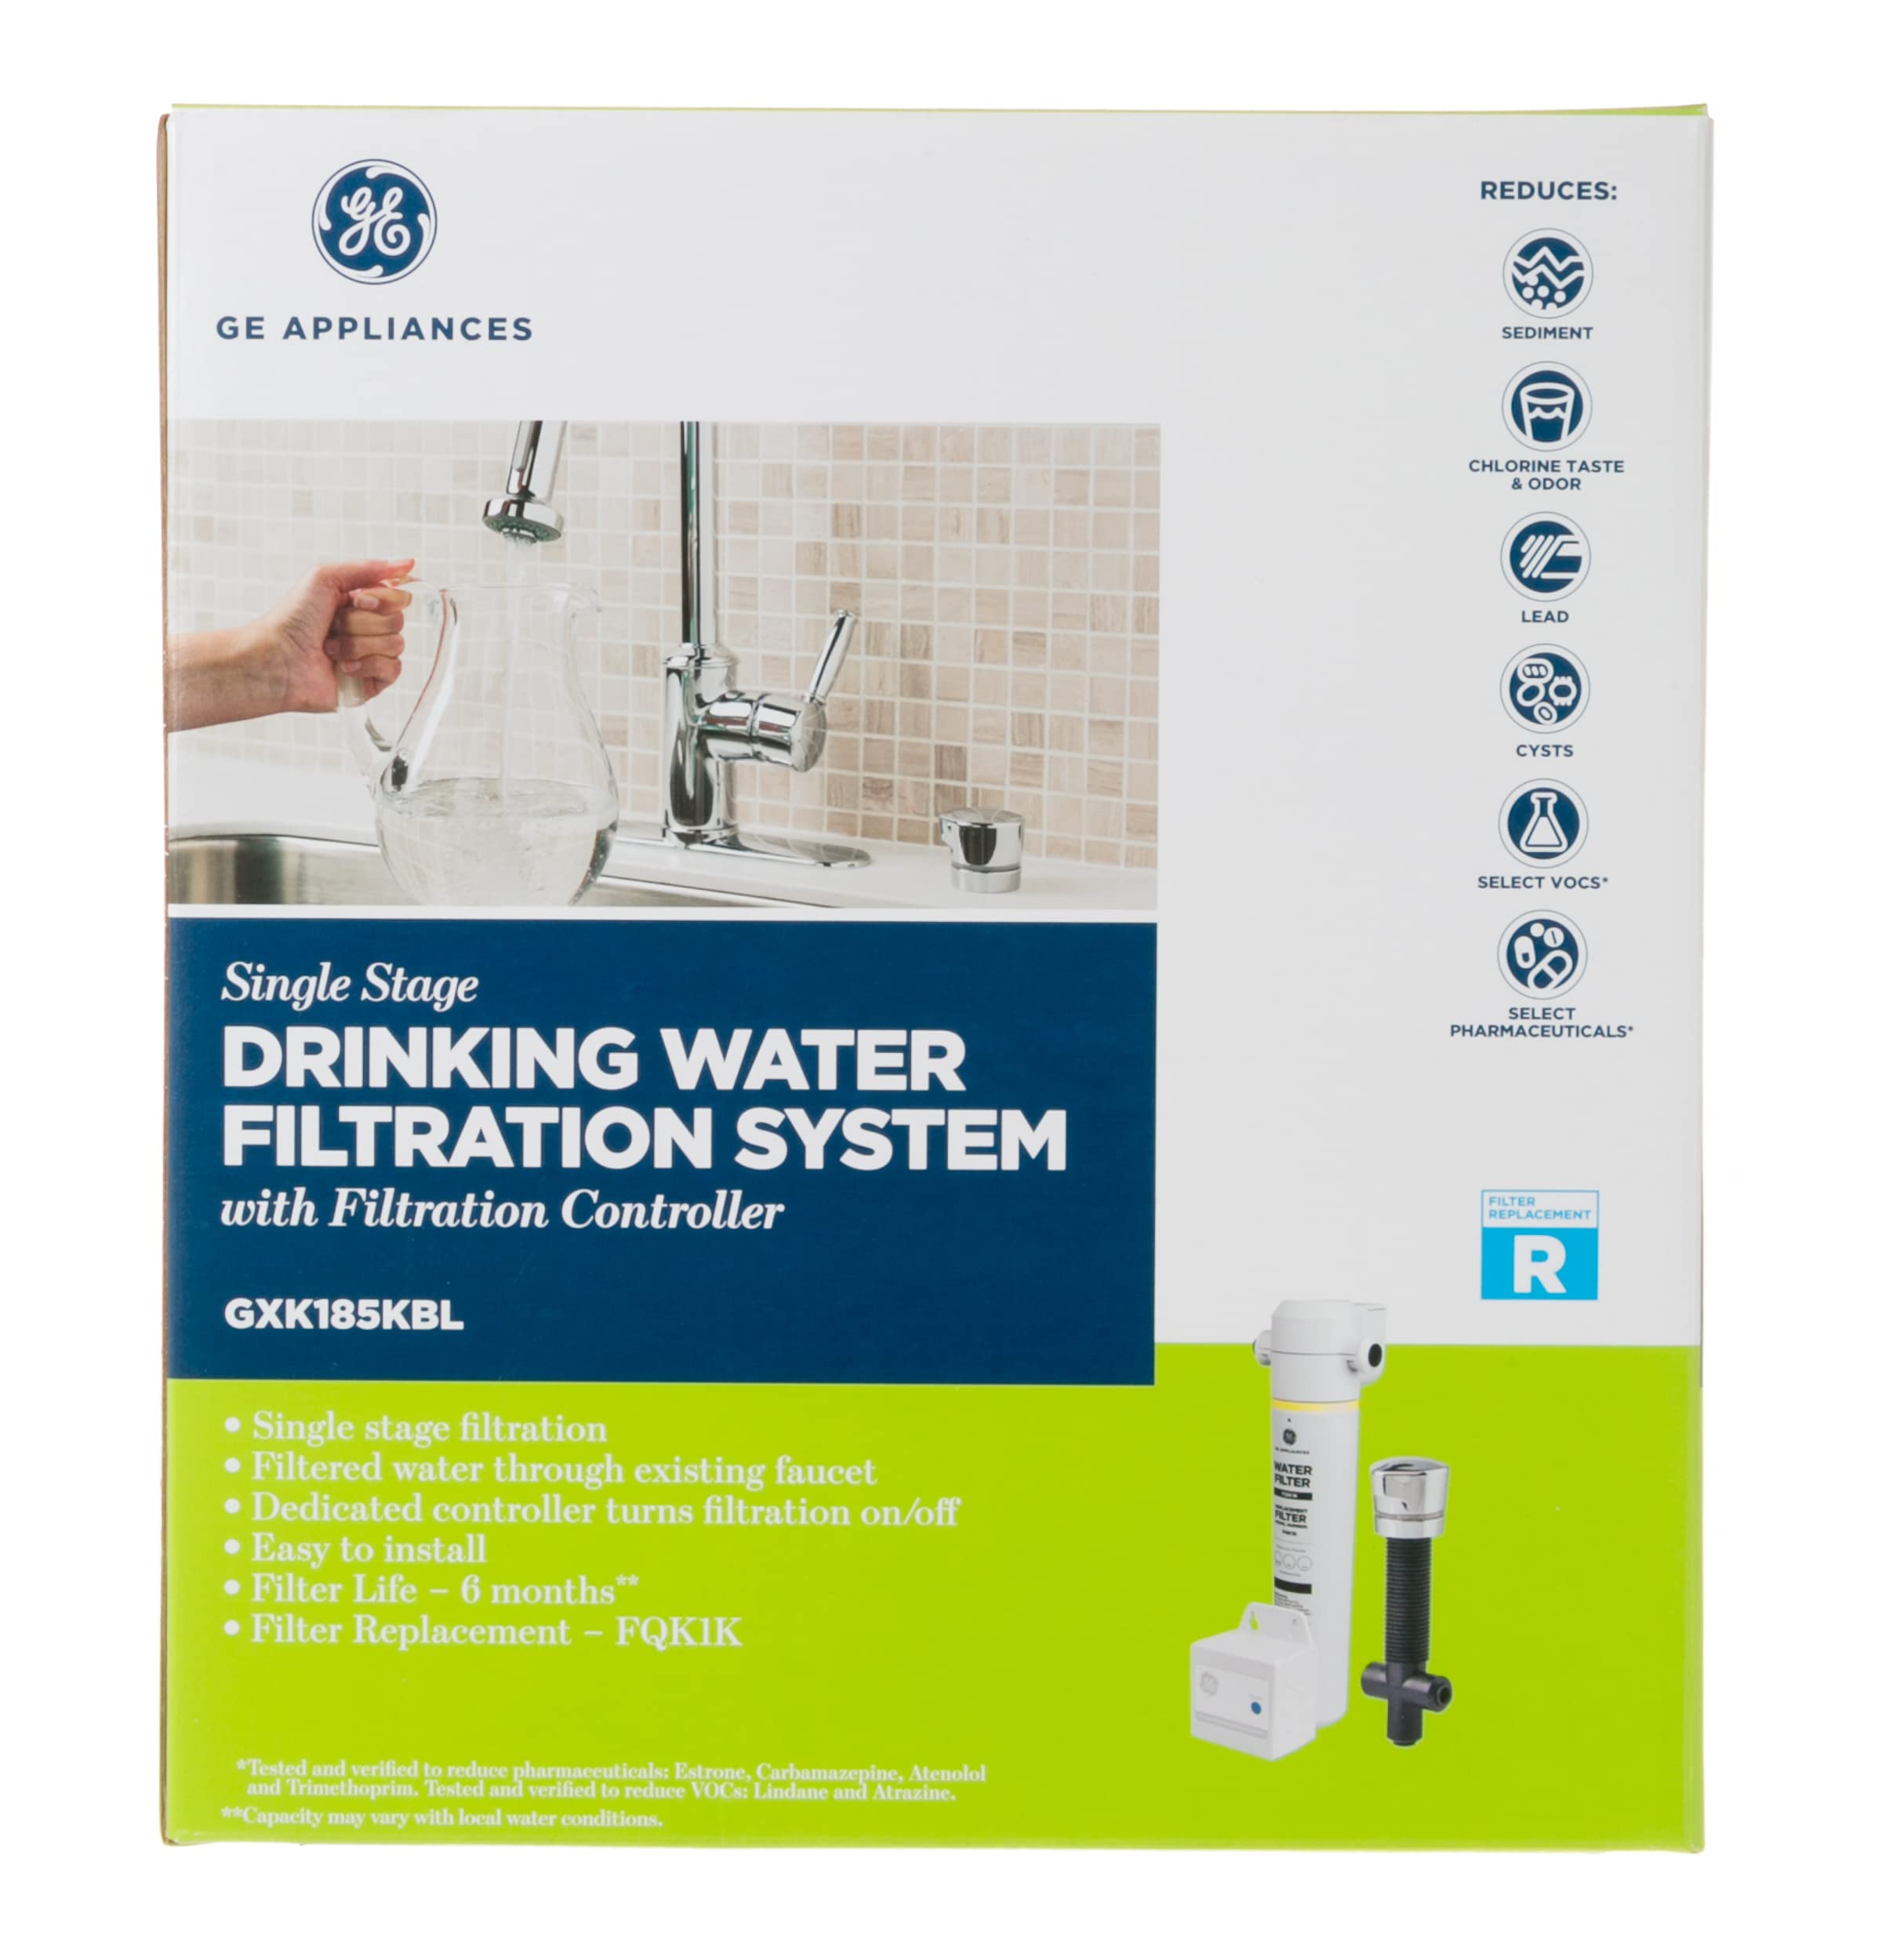 GE Single Stage Under Sink Water Filter System | Water Filtration System Reduces Impurities in Water | Easy Install, No Plumbing Required | Replace Filter (FQK1K) Every 6 Months | GXK185KBL